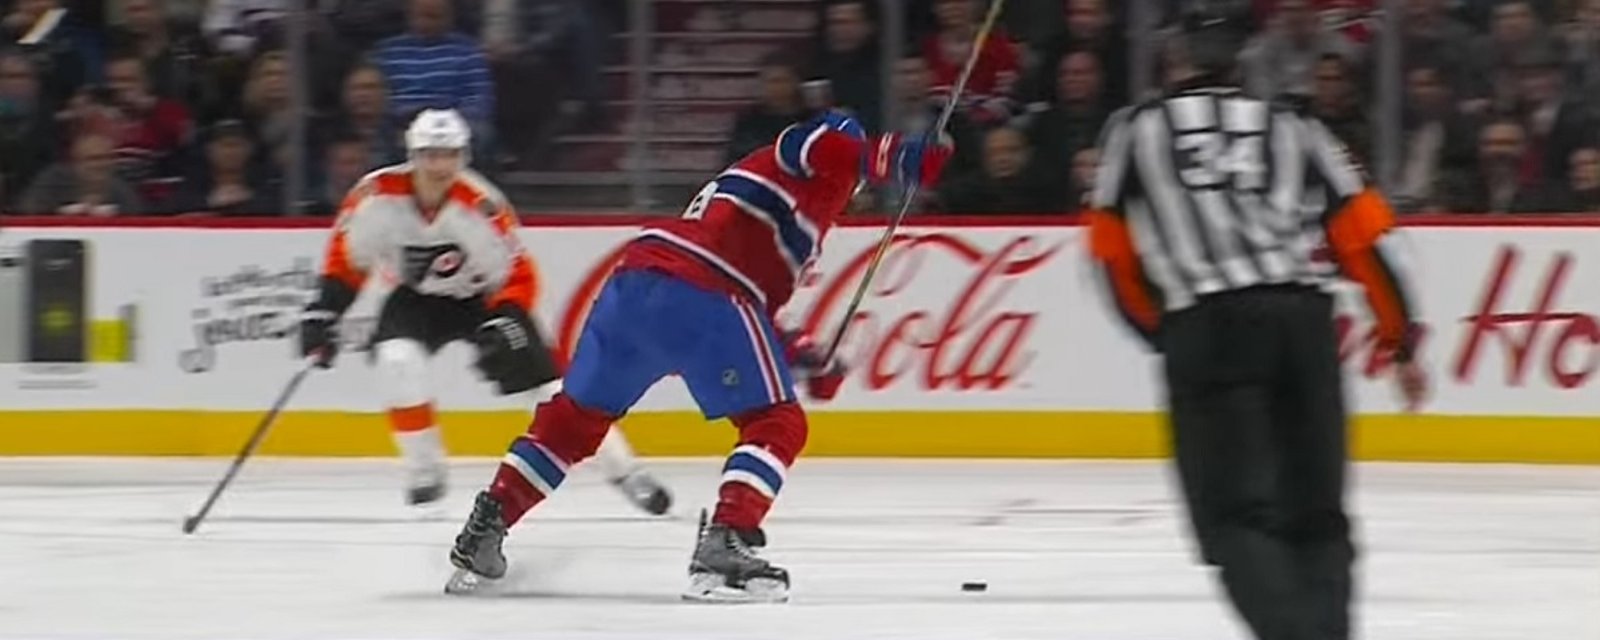 Weber's shot destroys a stick, and keeps going into the net.